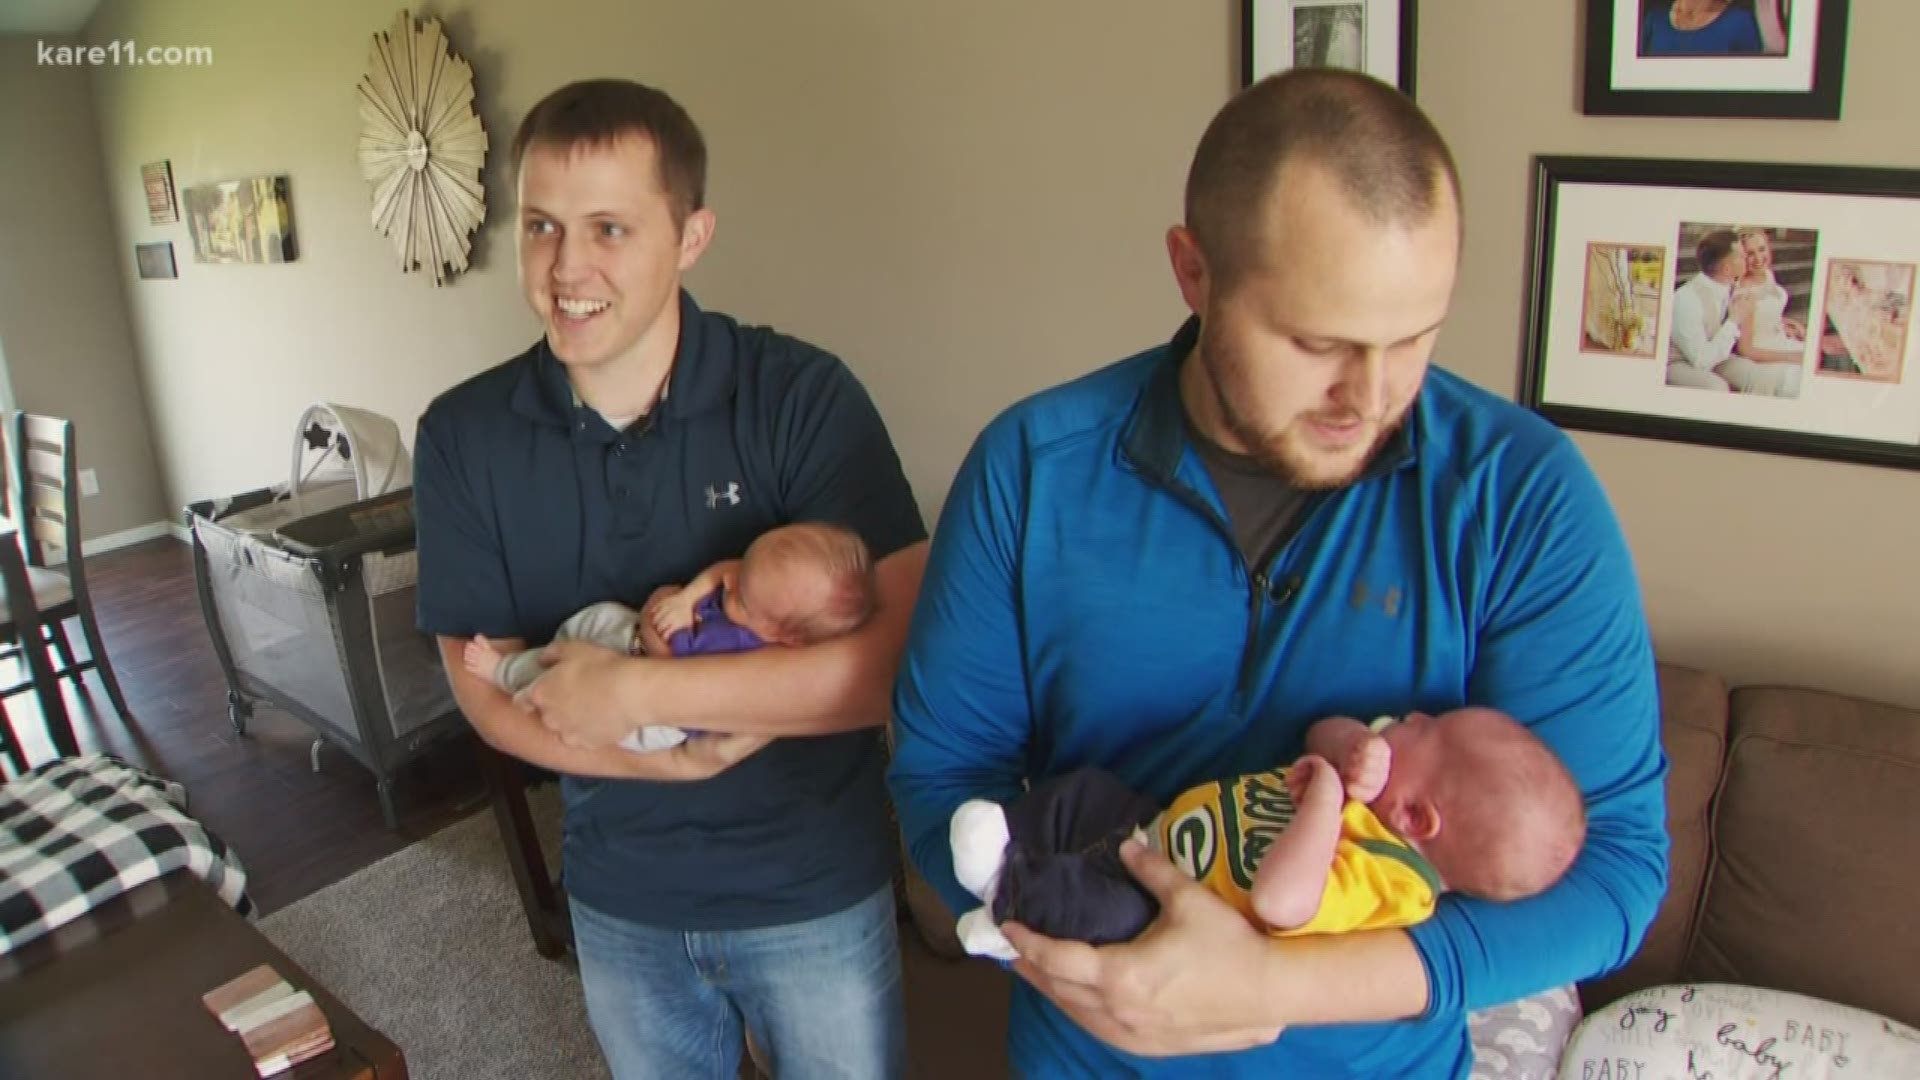 Identical twins Pat and Paul Young both became first-time dads on Sept. 19.